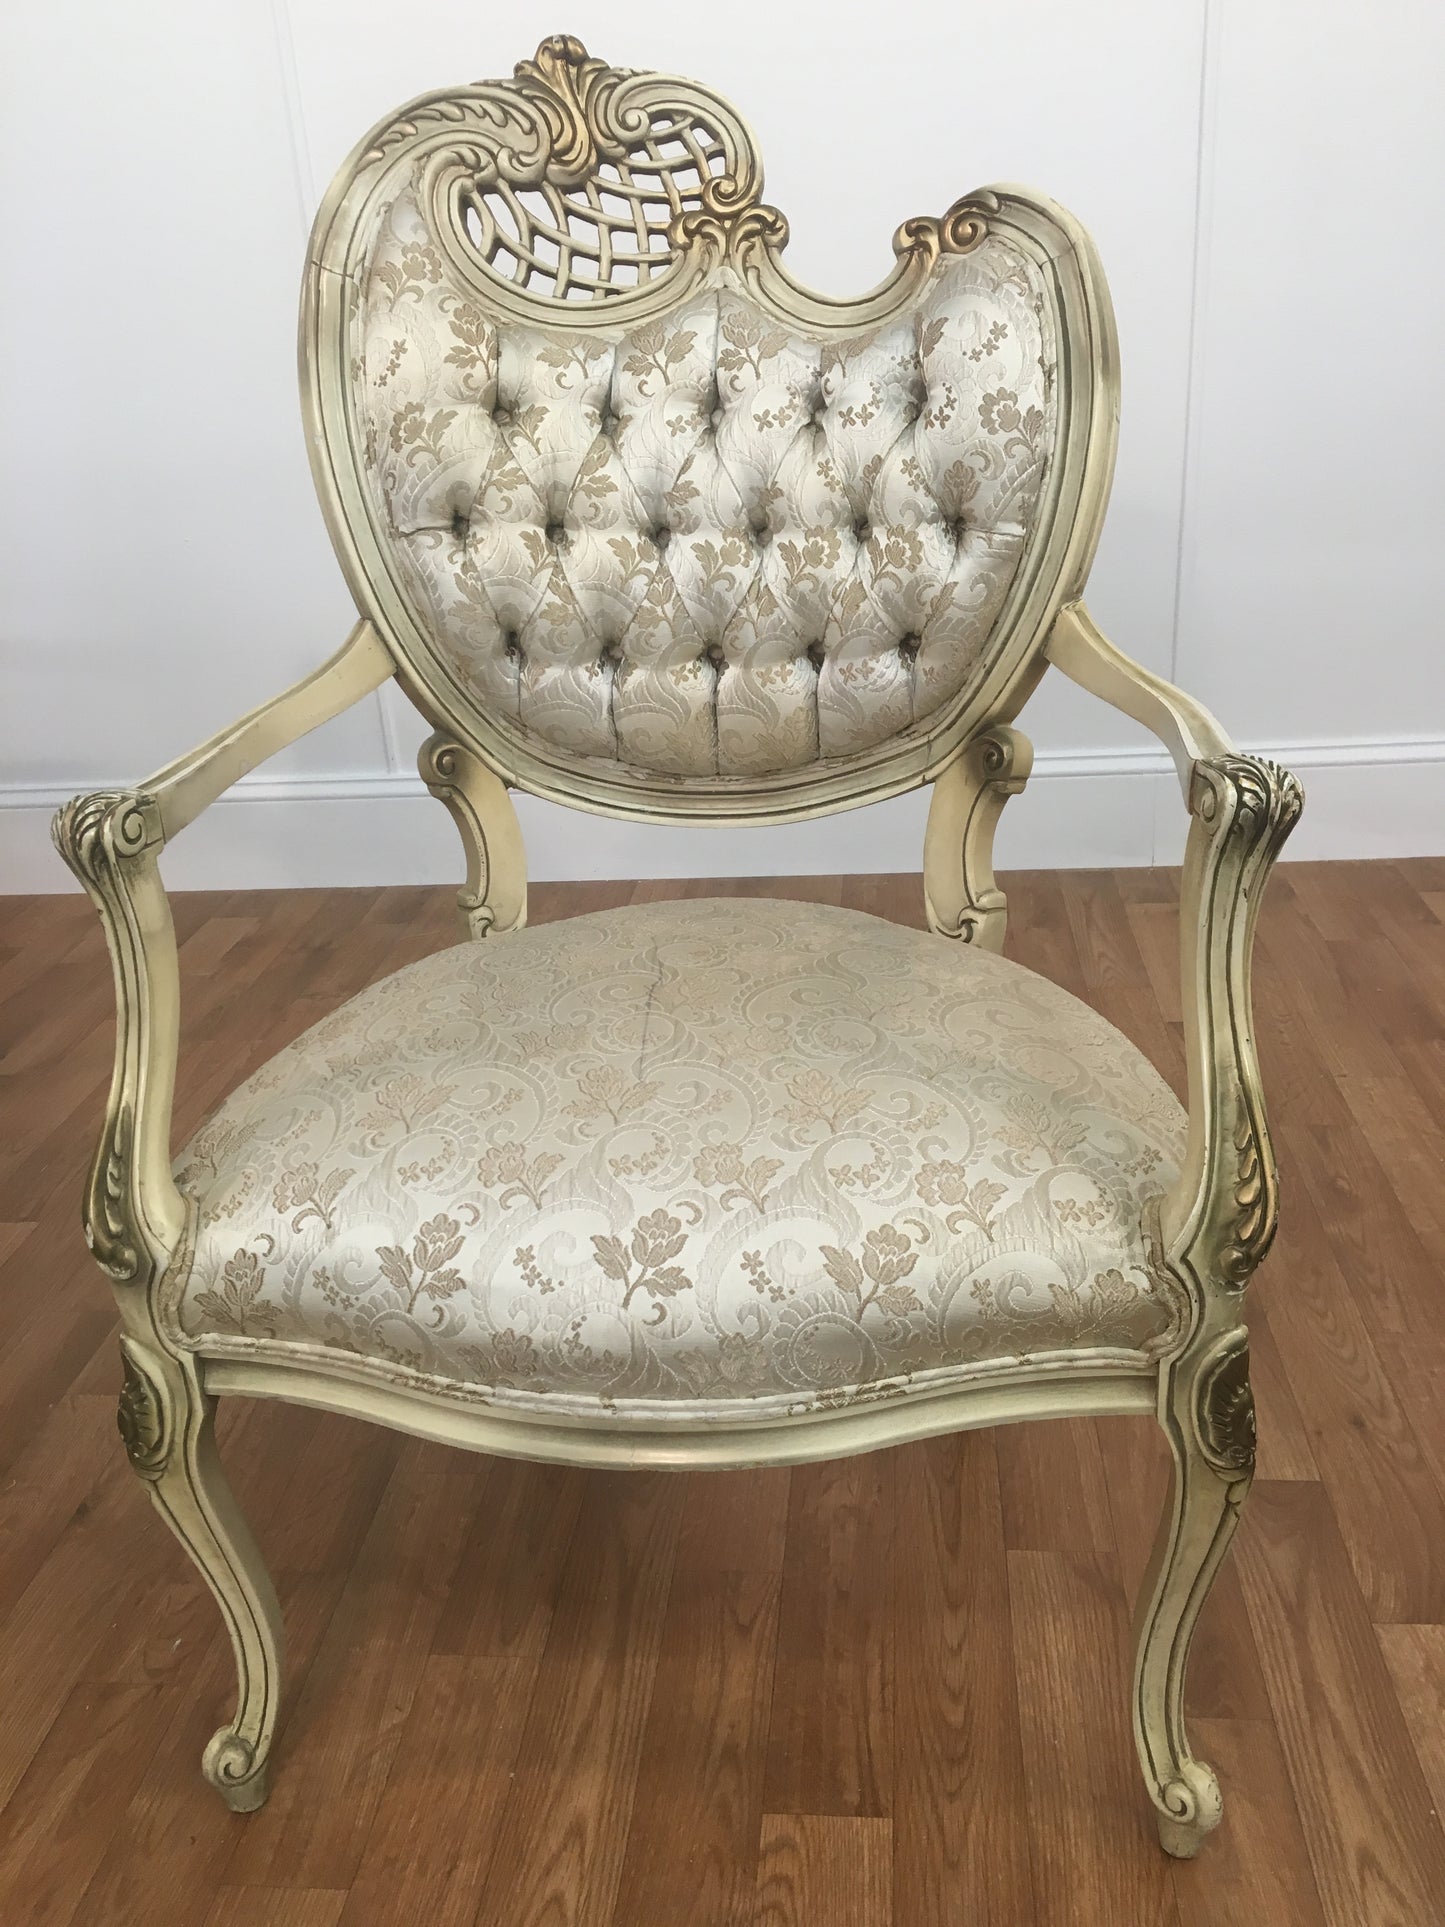 ORNATE IVORY FRENCH PROVINCIAL CHAIR